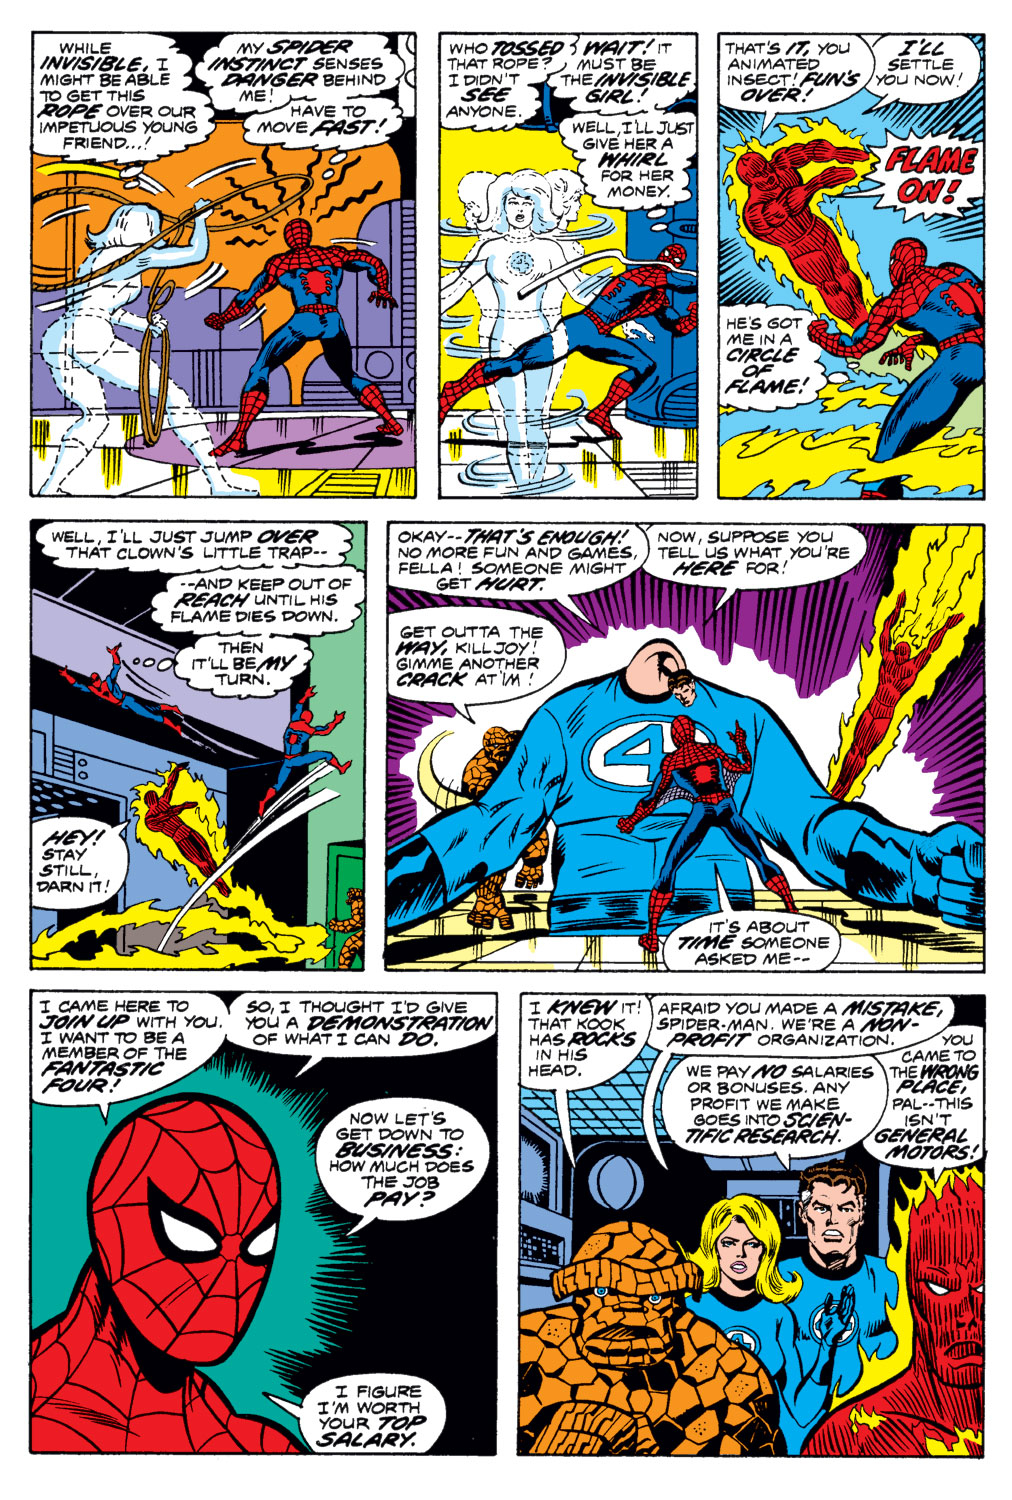 What If? (1977) issue 1 - Spider-Man joined the Fantastic Four - Page 9